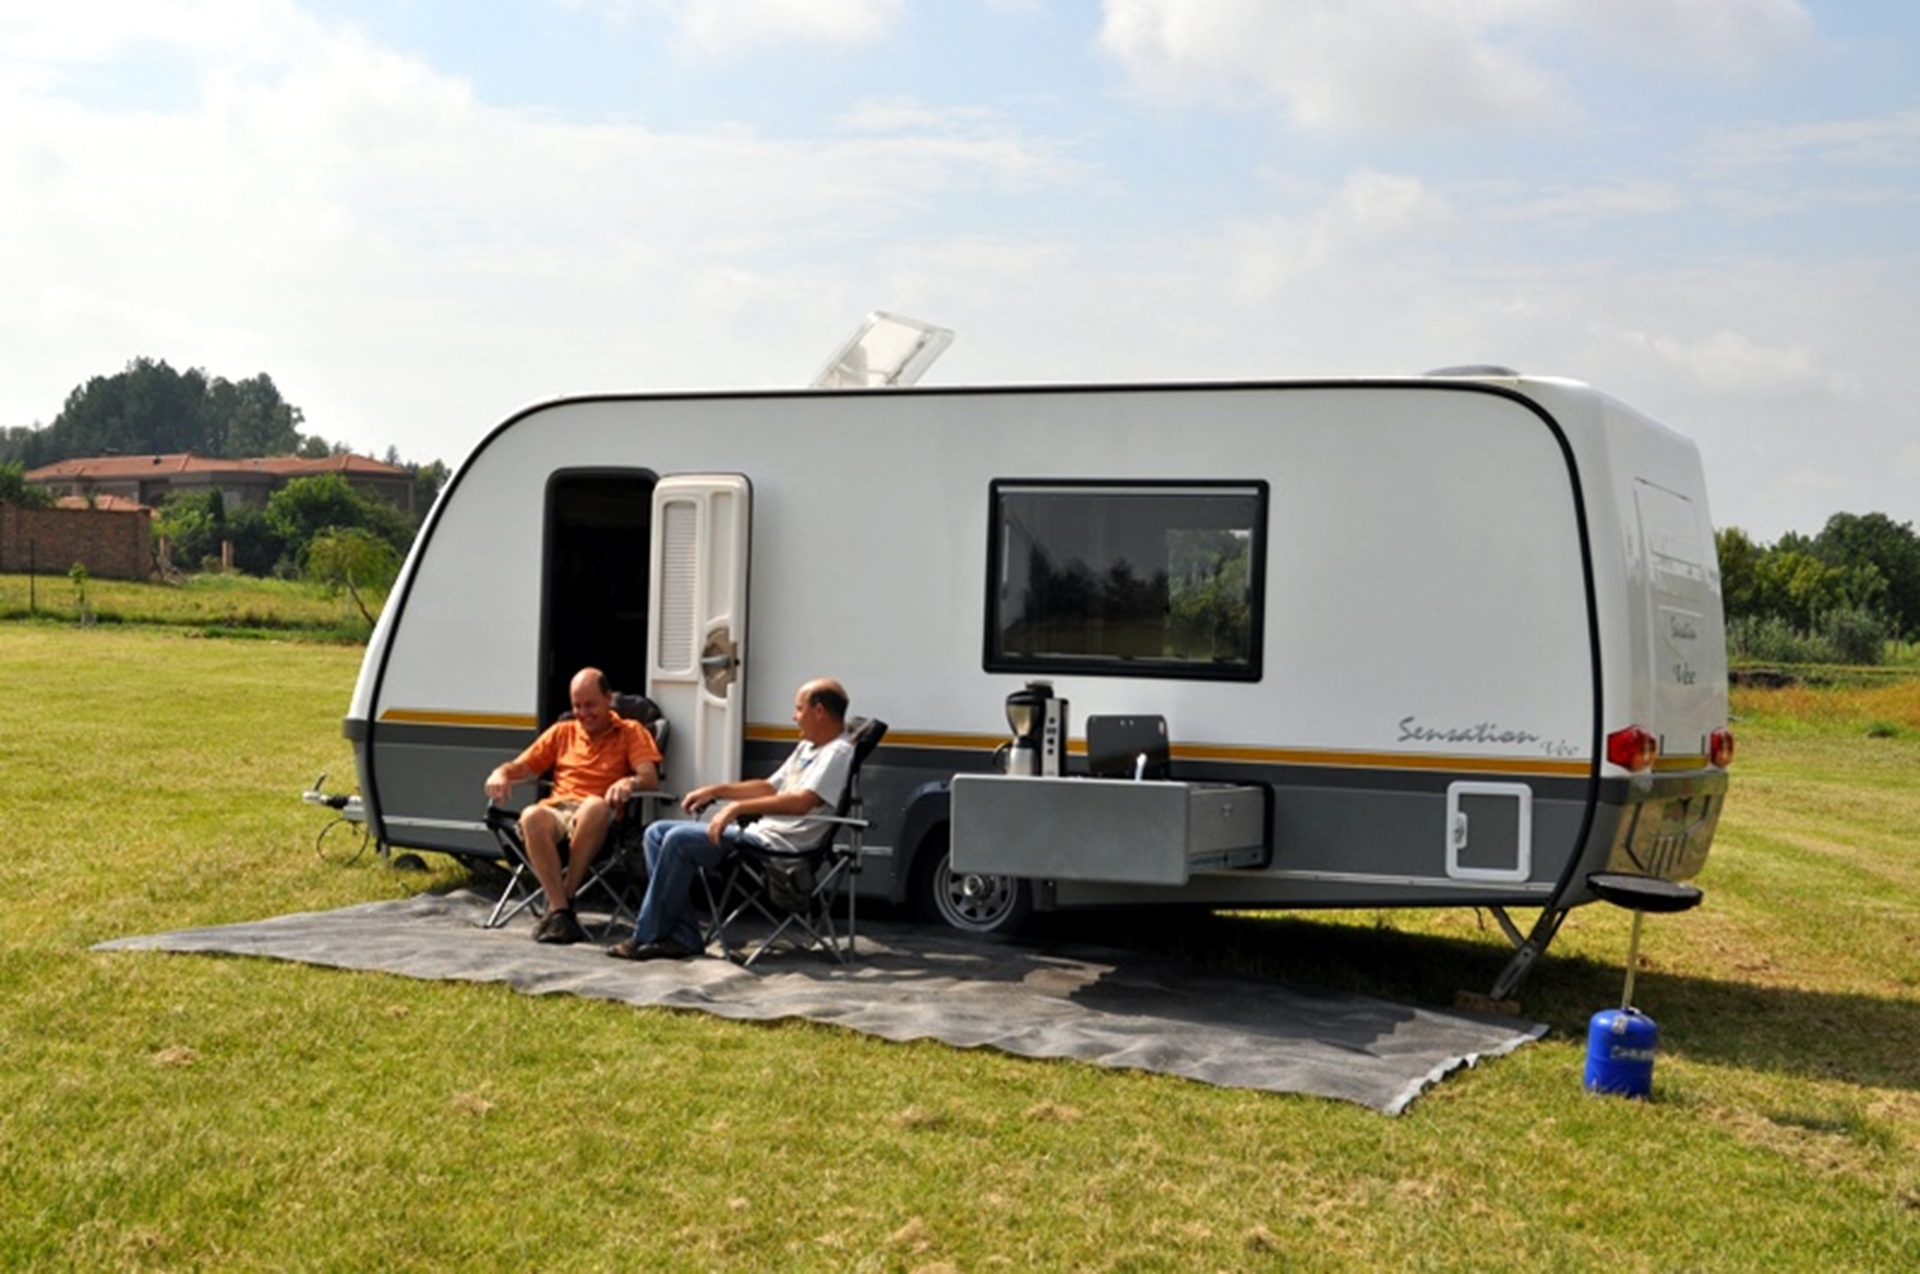 Rand Show to host the launch of new local caravan brand